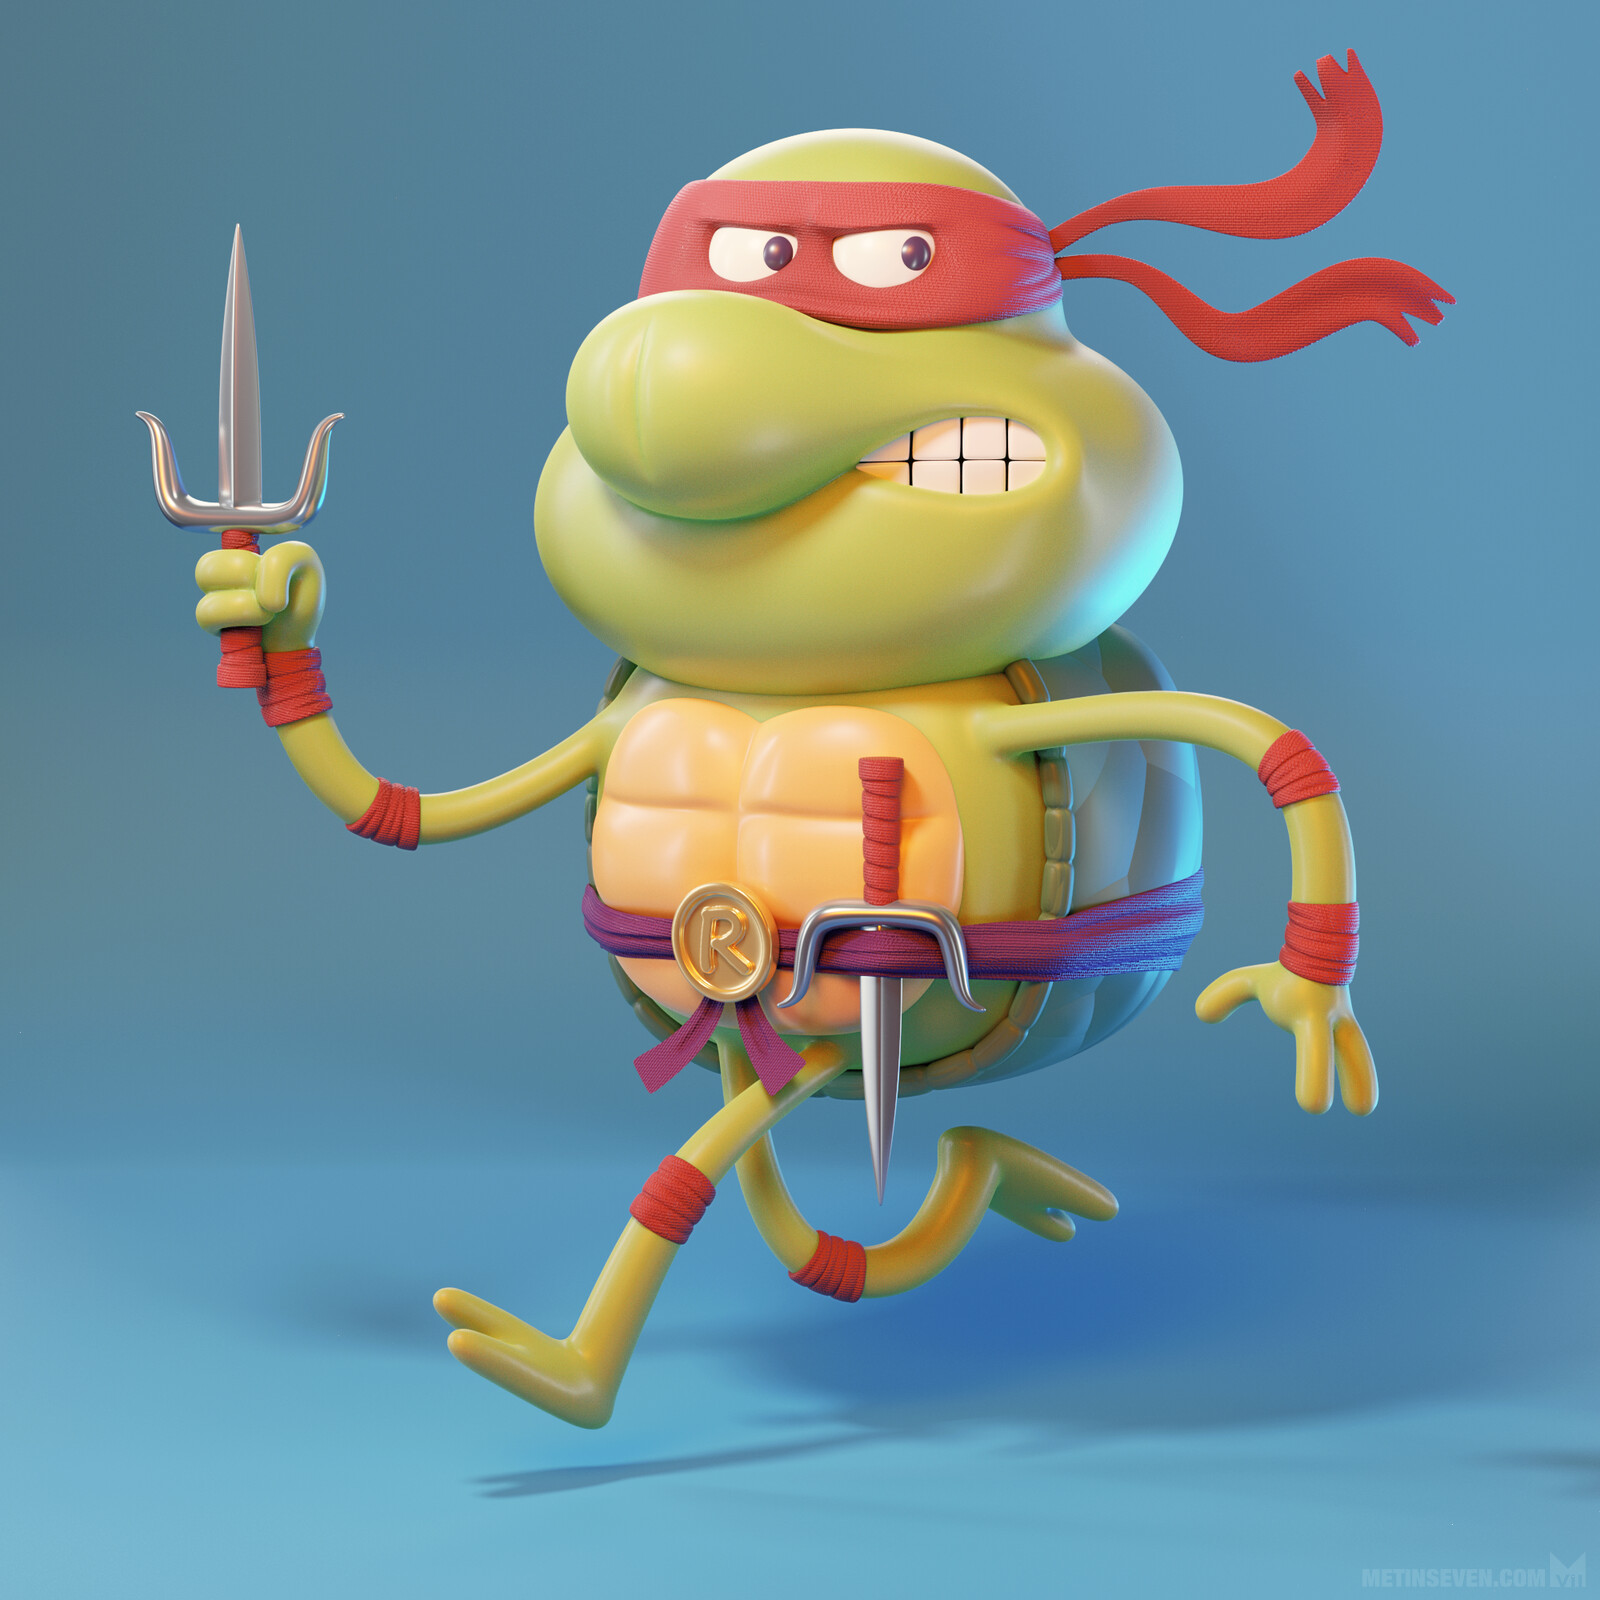 Cowabunga! 🐢 | Tribute to the Teenage Mutant Ninja Turtles, based on a drawing by Matt Kaufenberg. Guess who this is? A hint is on his belt. 😉